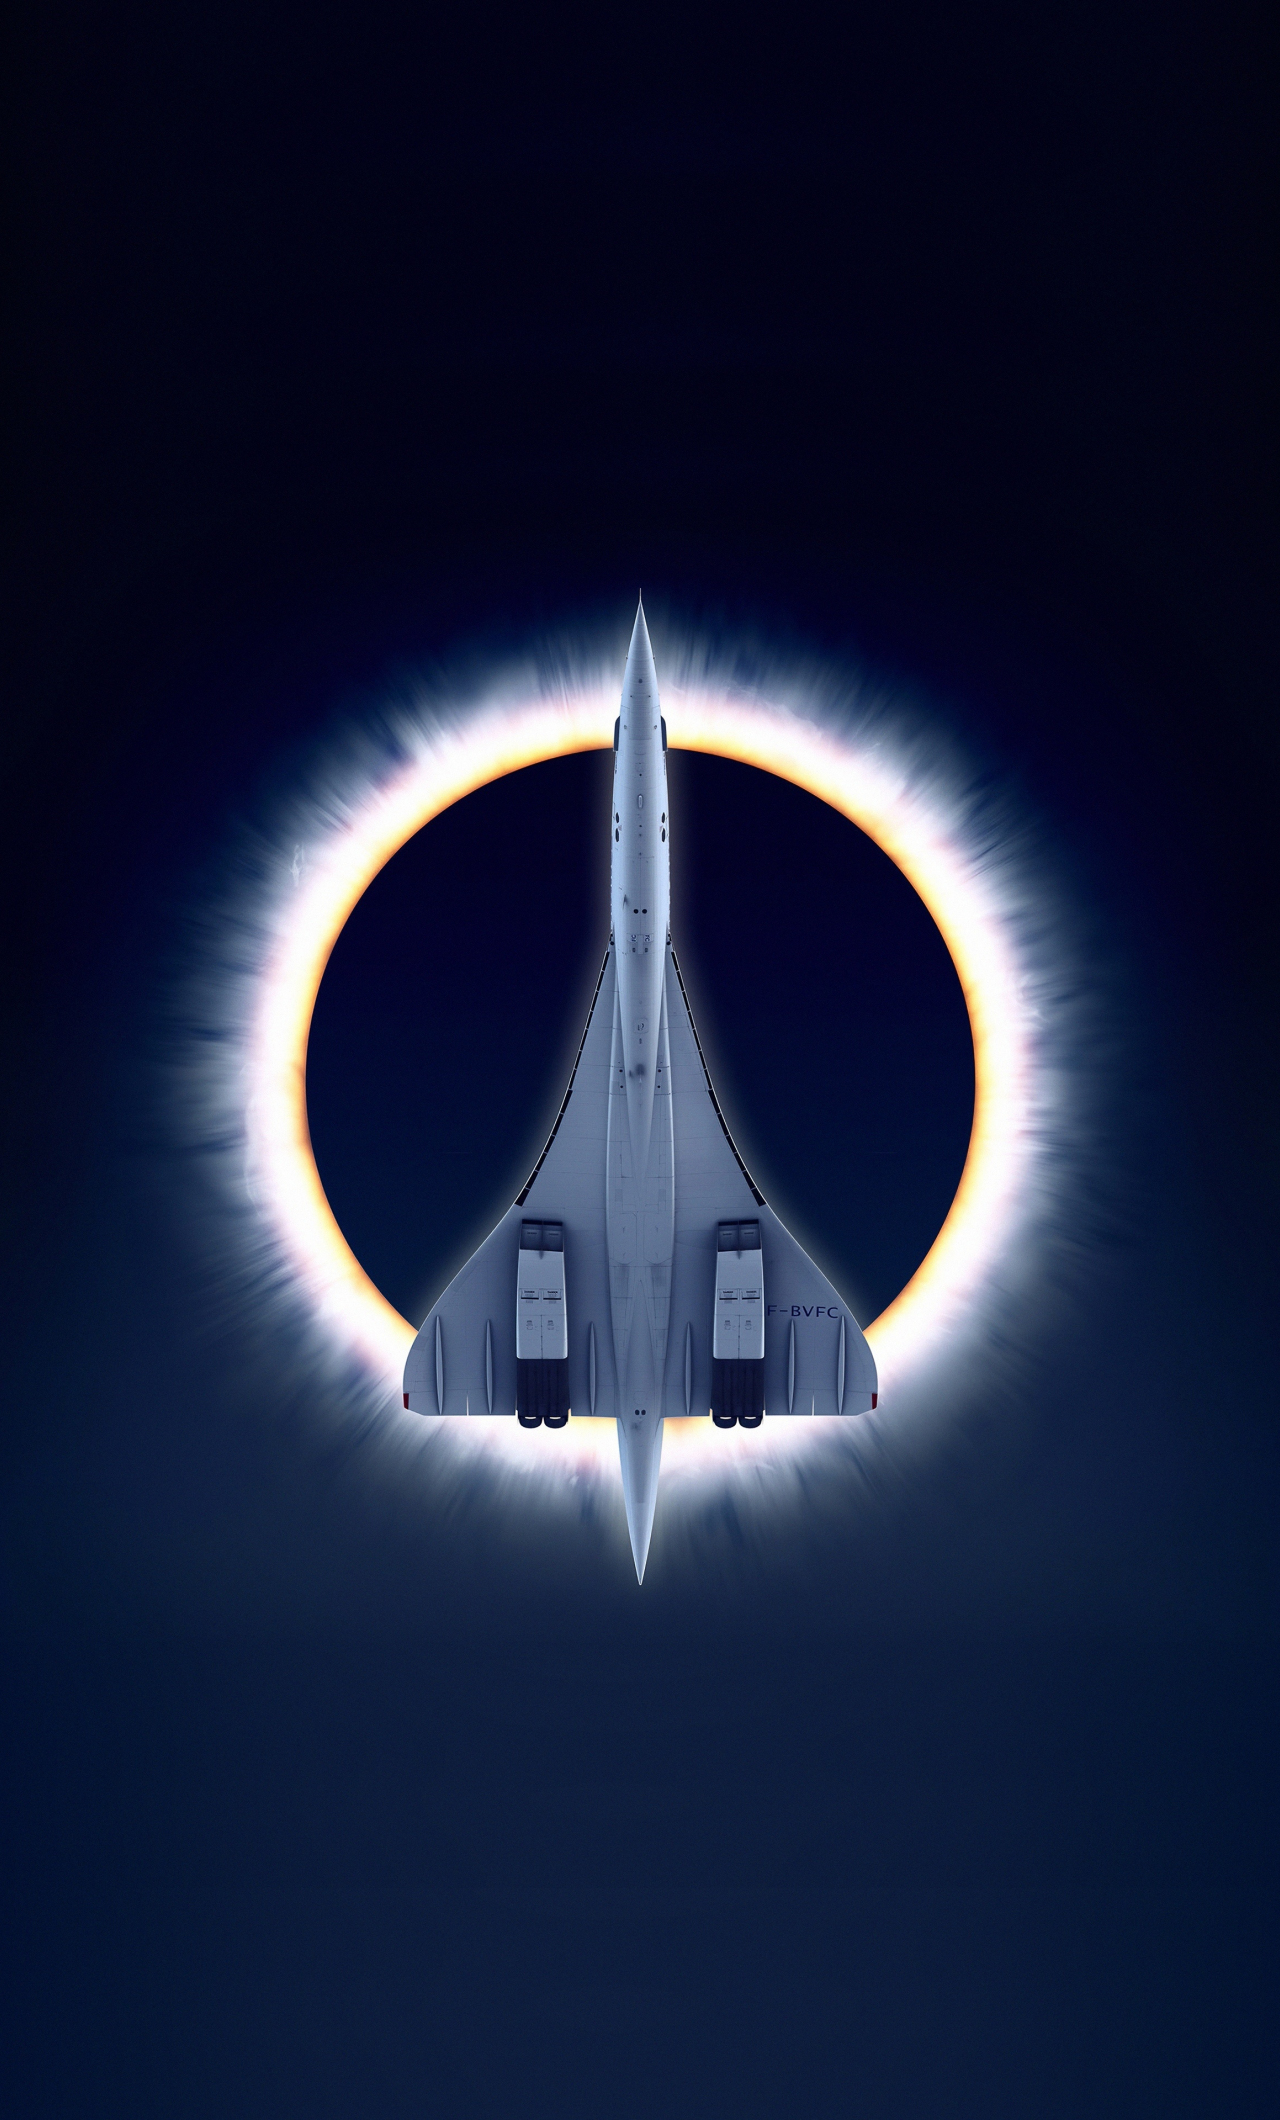 Concorde Carre, eclipse, airplane, moon, aircraft, 1280x2120 wallpaper